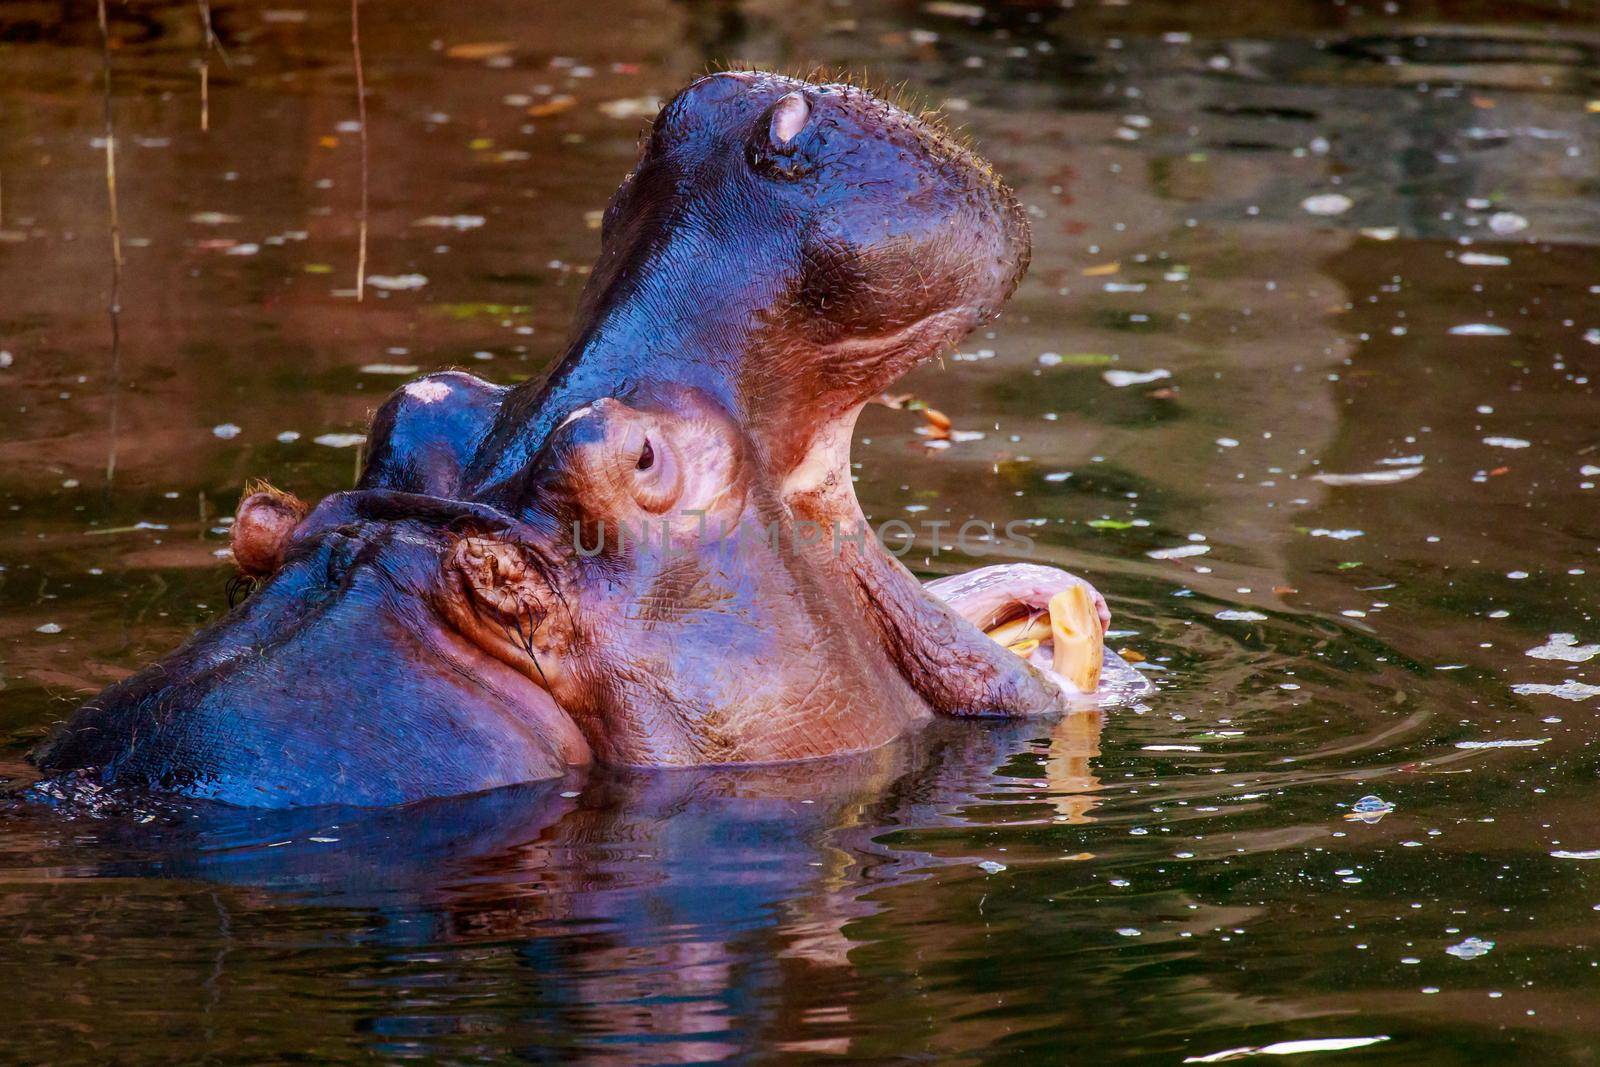 Hippo yawning by gepeng